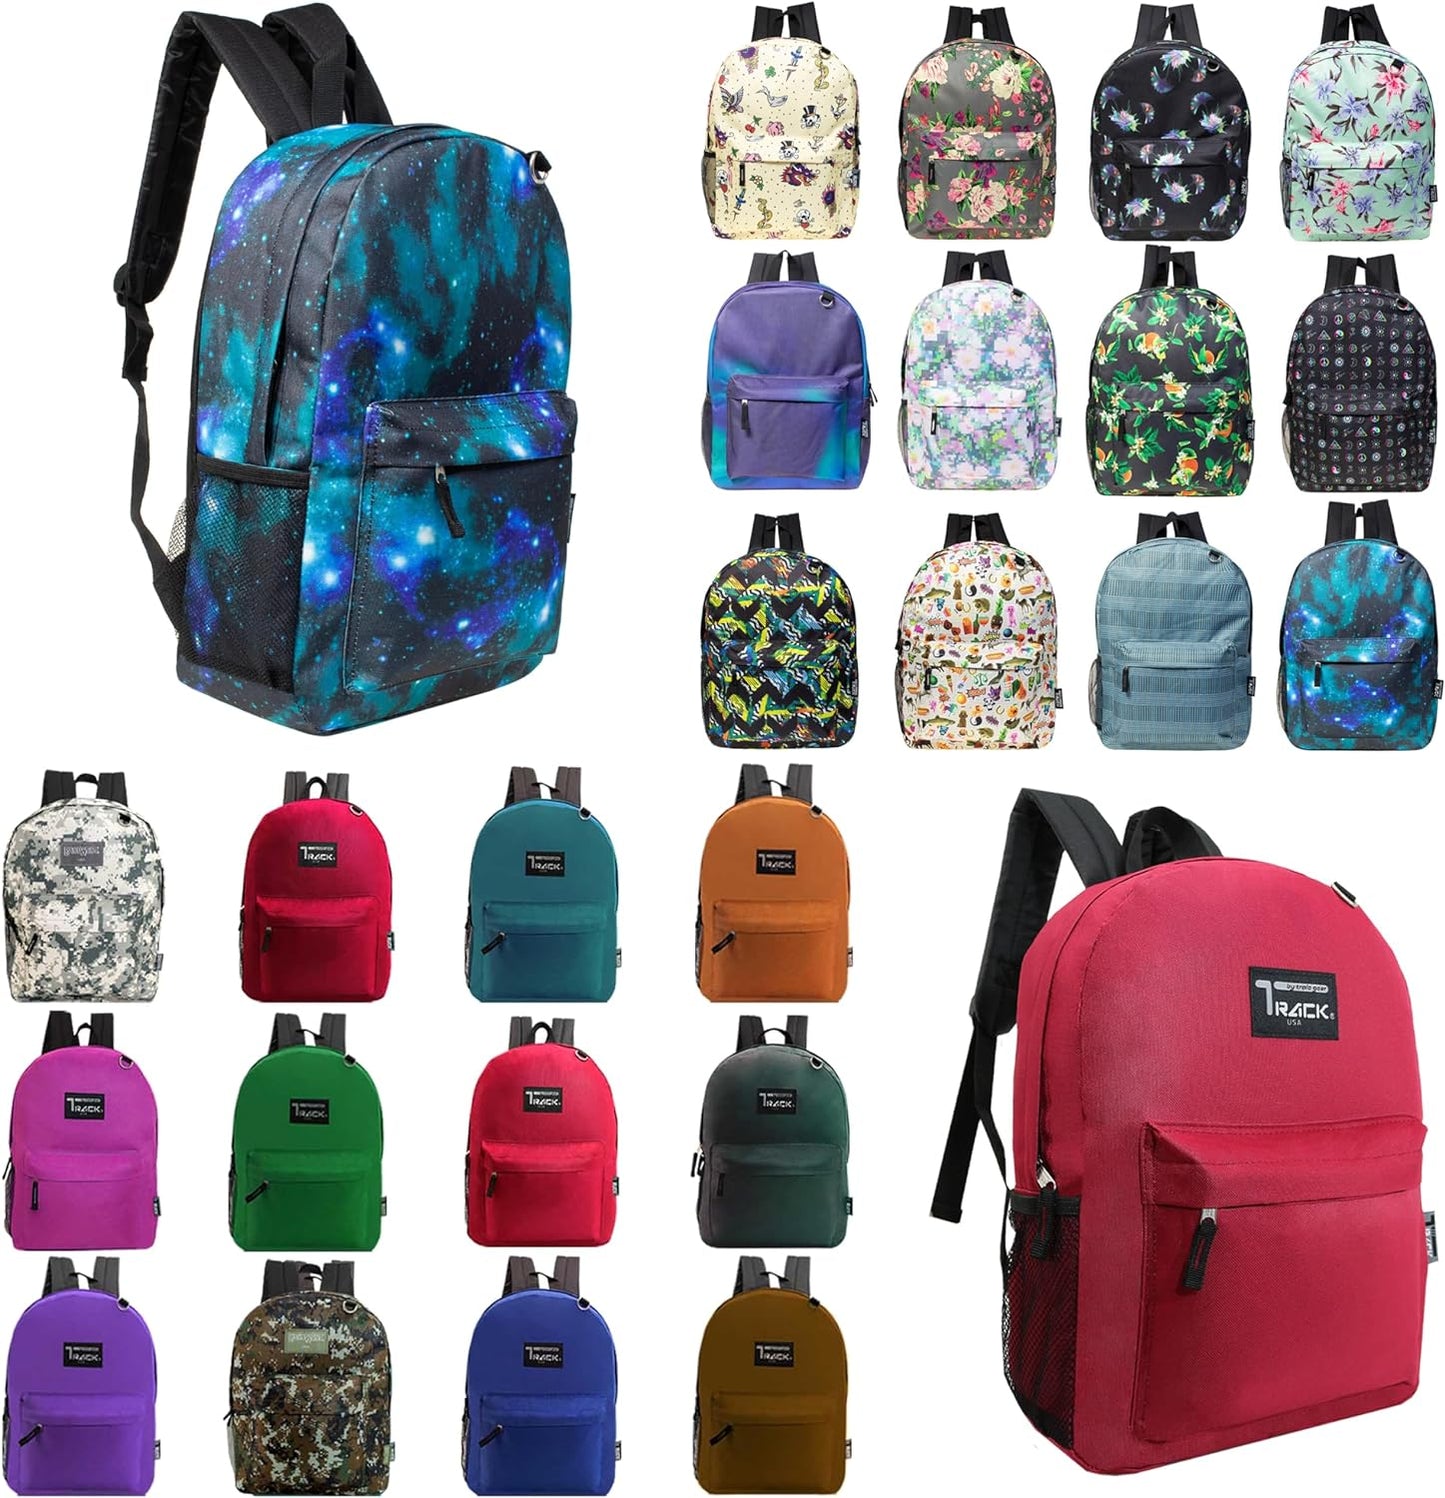 24 Pack 17 Inch Wholesale Bulk Backpack for Work School in Assorted Color Perfect for Donations and Giveaways